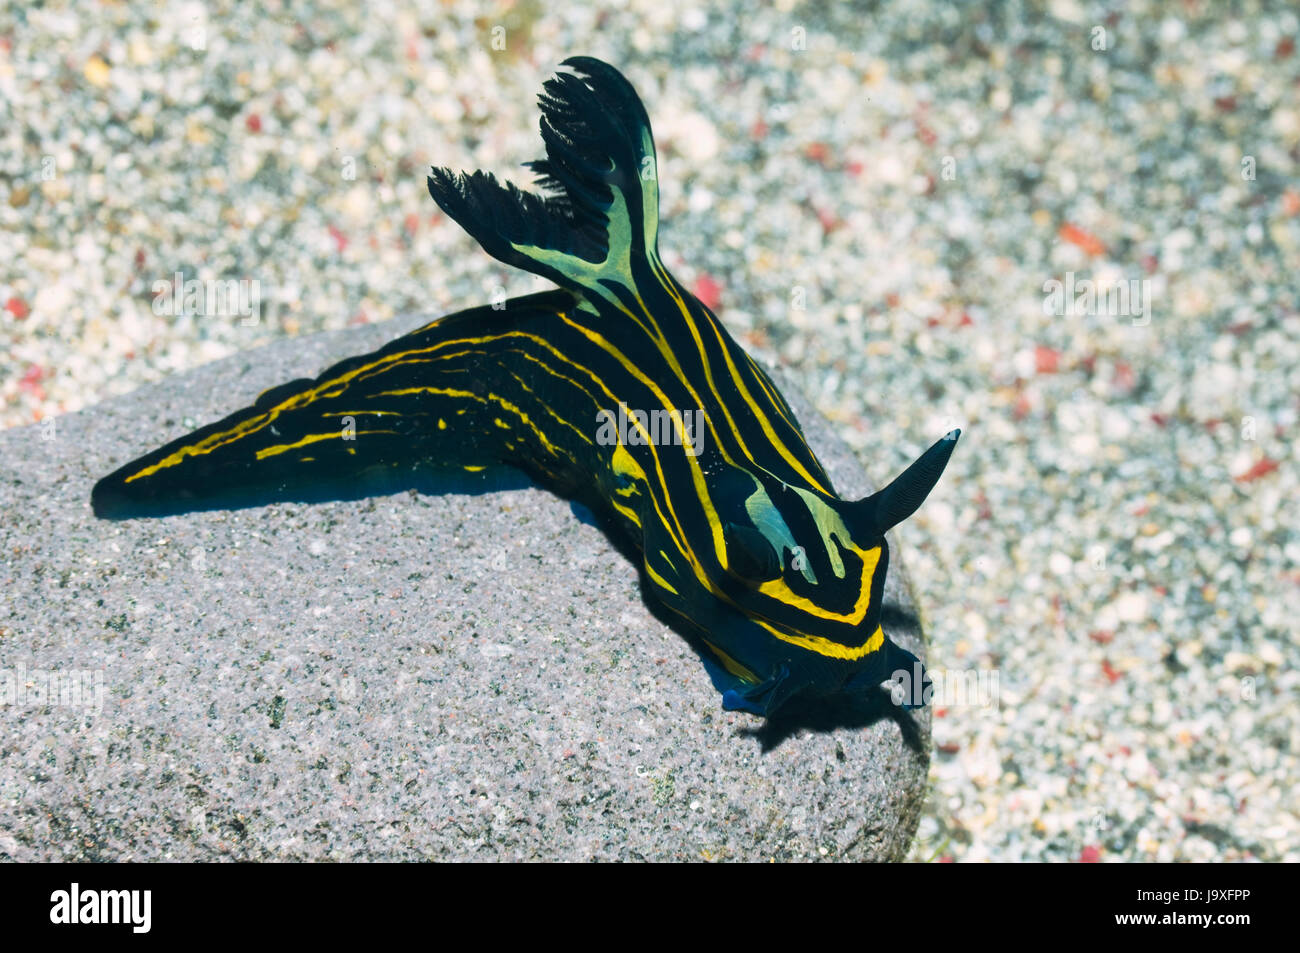 Nudibranch: Roboastra luteolineata.  This nudibranch actively hunt and feed on other nudibranchs.  Rinca, Indonesia. Stock Photo